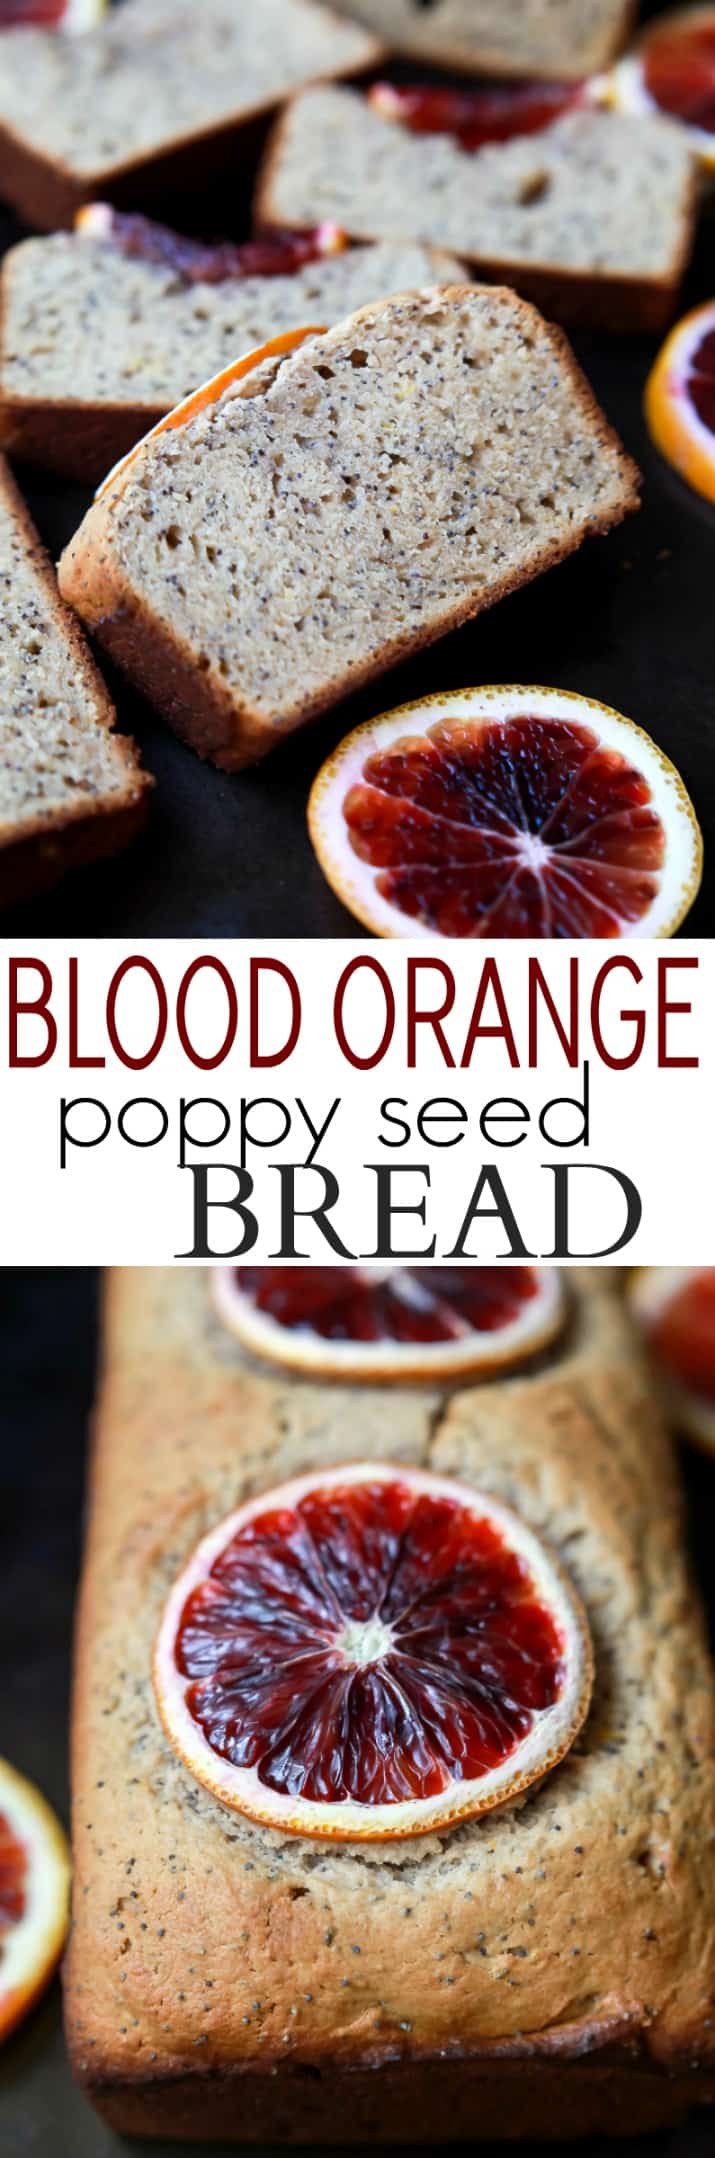 A loaf of Blood Orange Poppy Seed Bread with recipe title text over the image